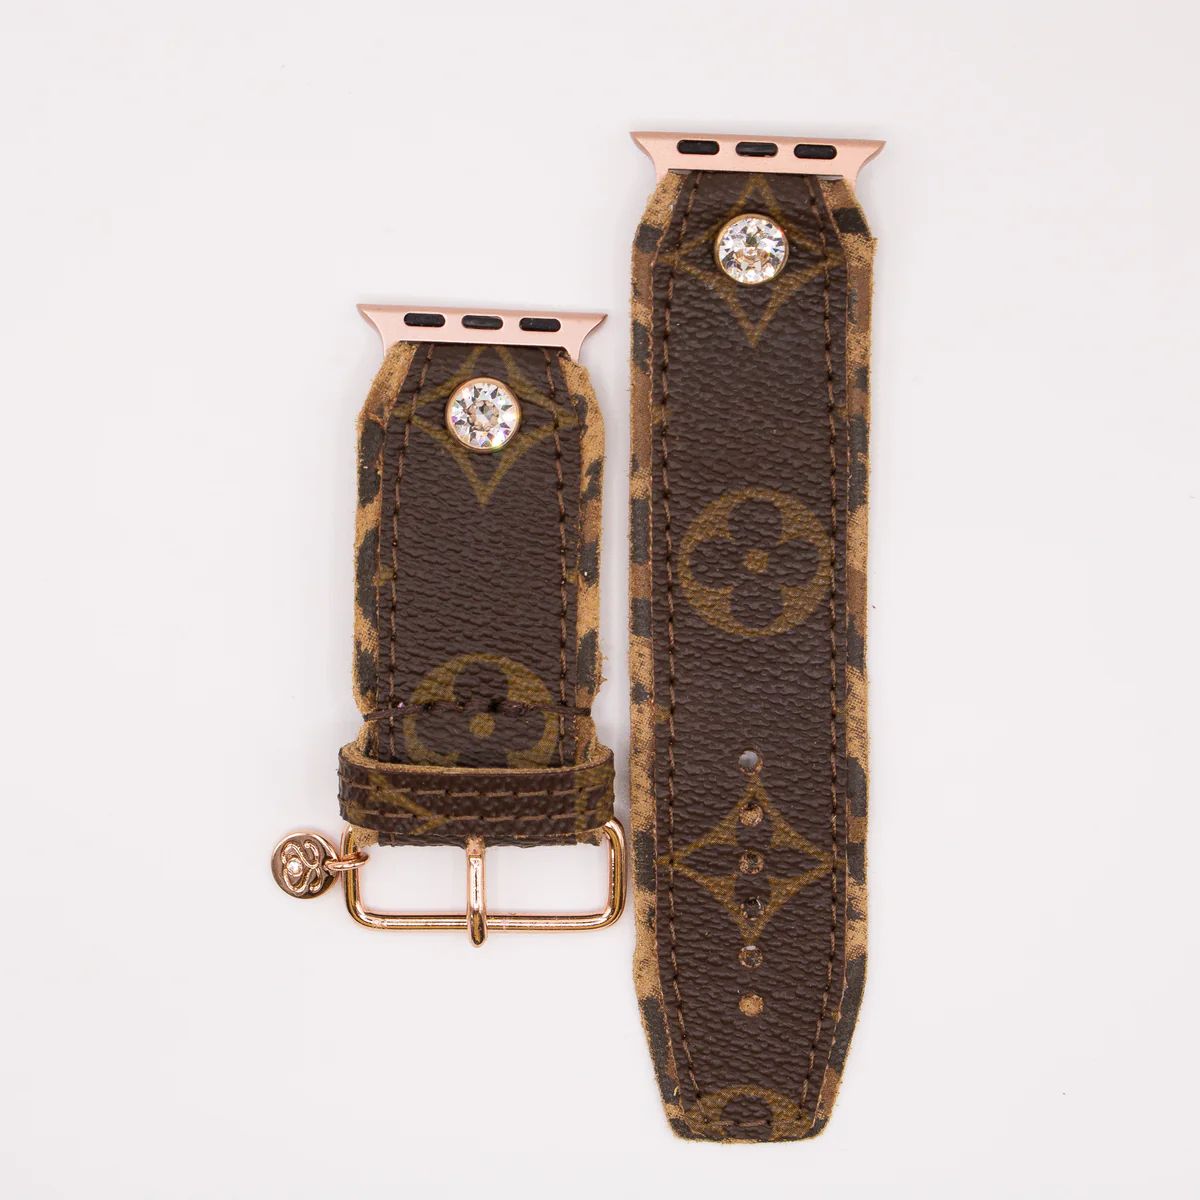 Ready to Ship - Upcycled LV Monogram with Leopard Watchband (Size 3, Apple Watch 38-41mm) | Spark*l